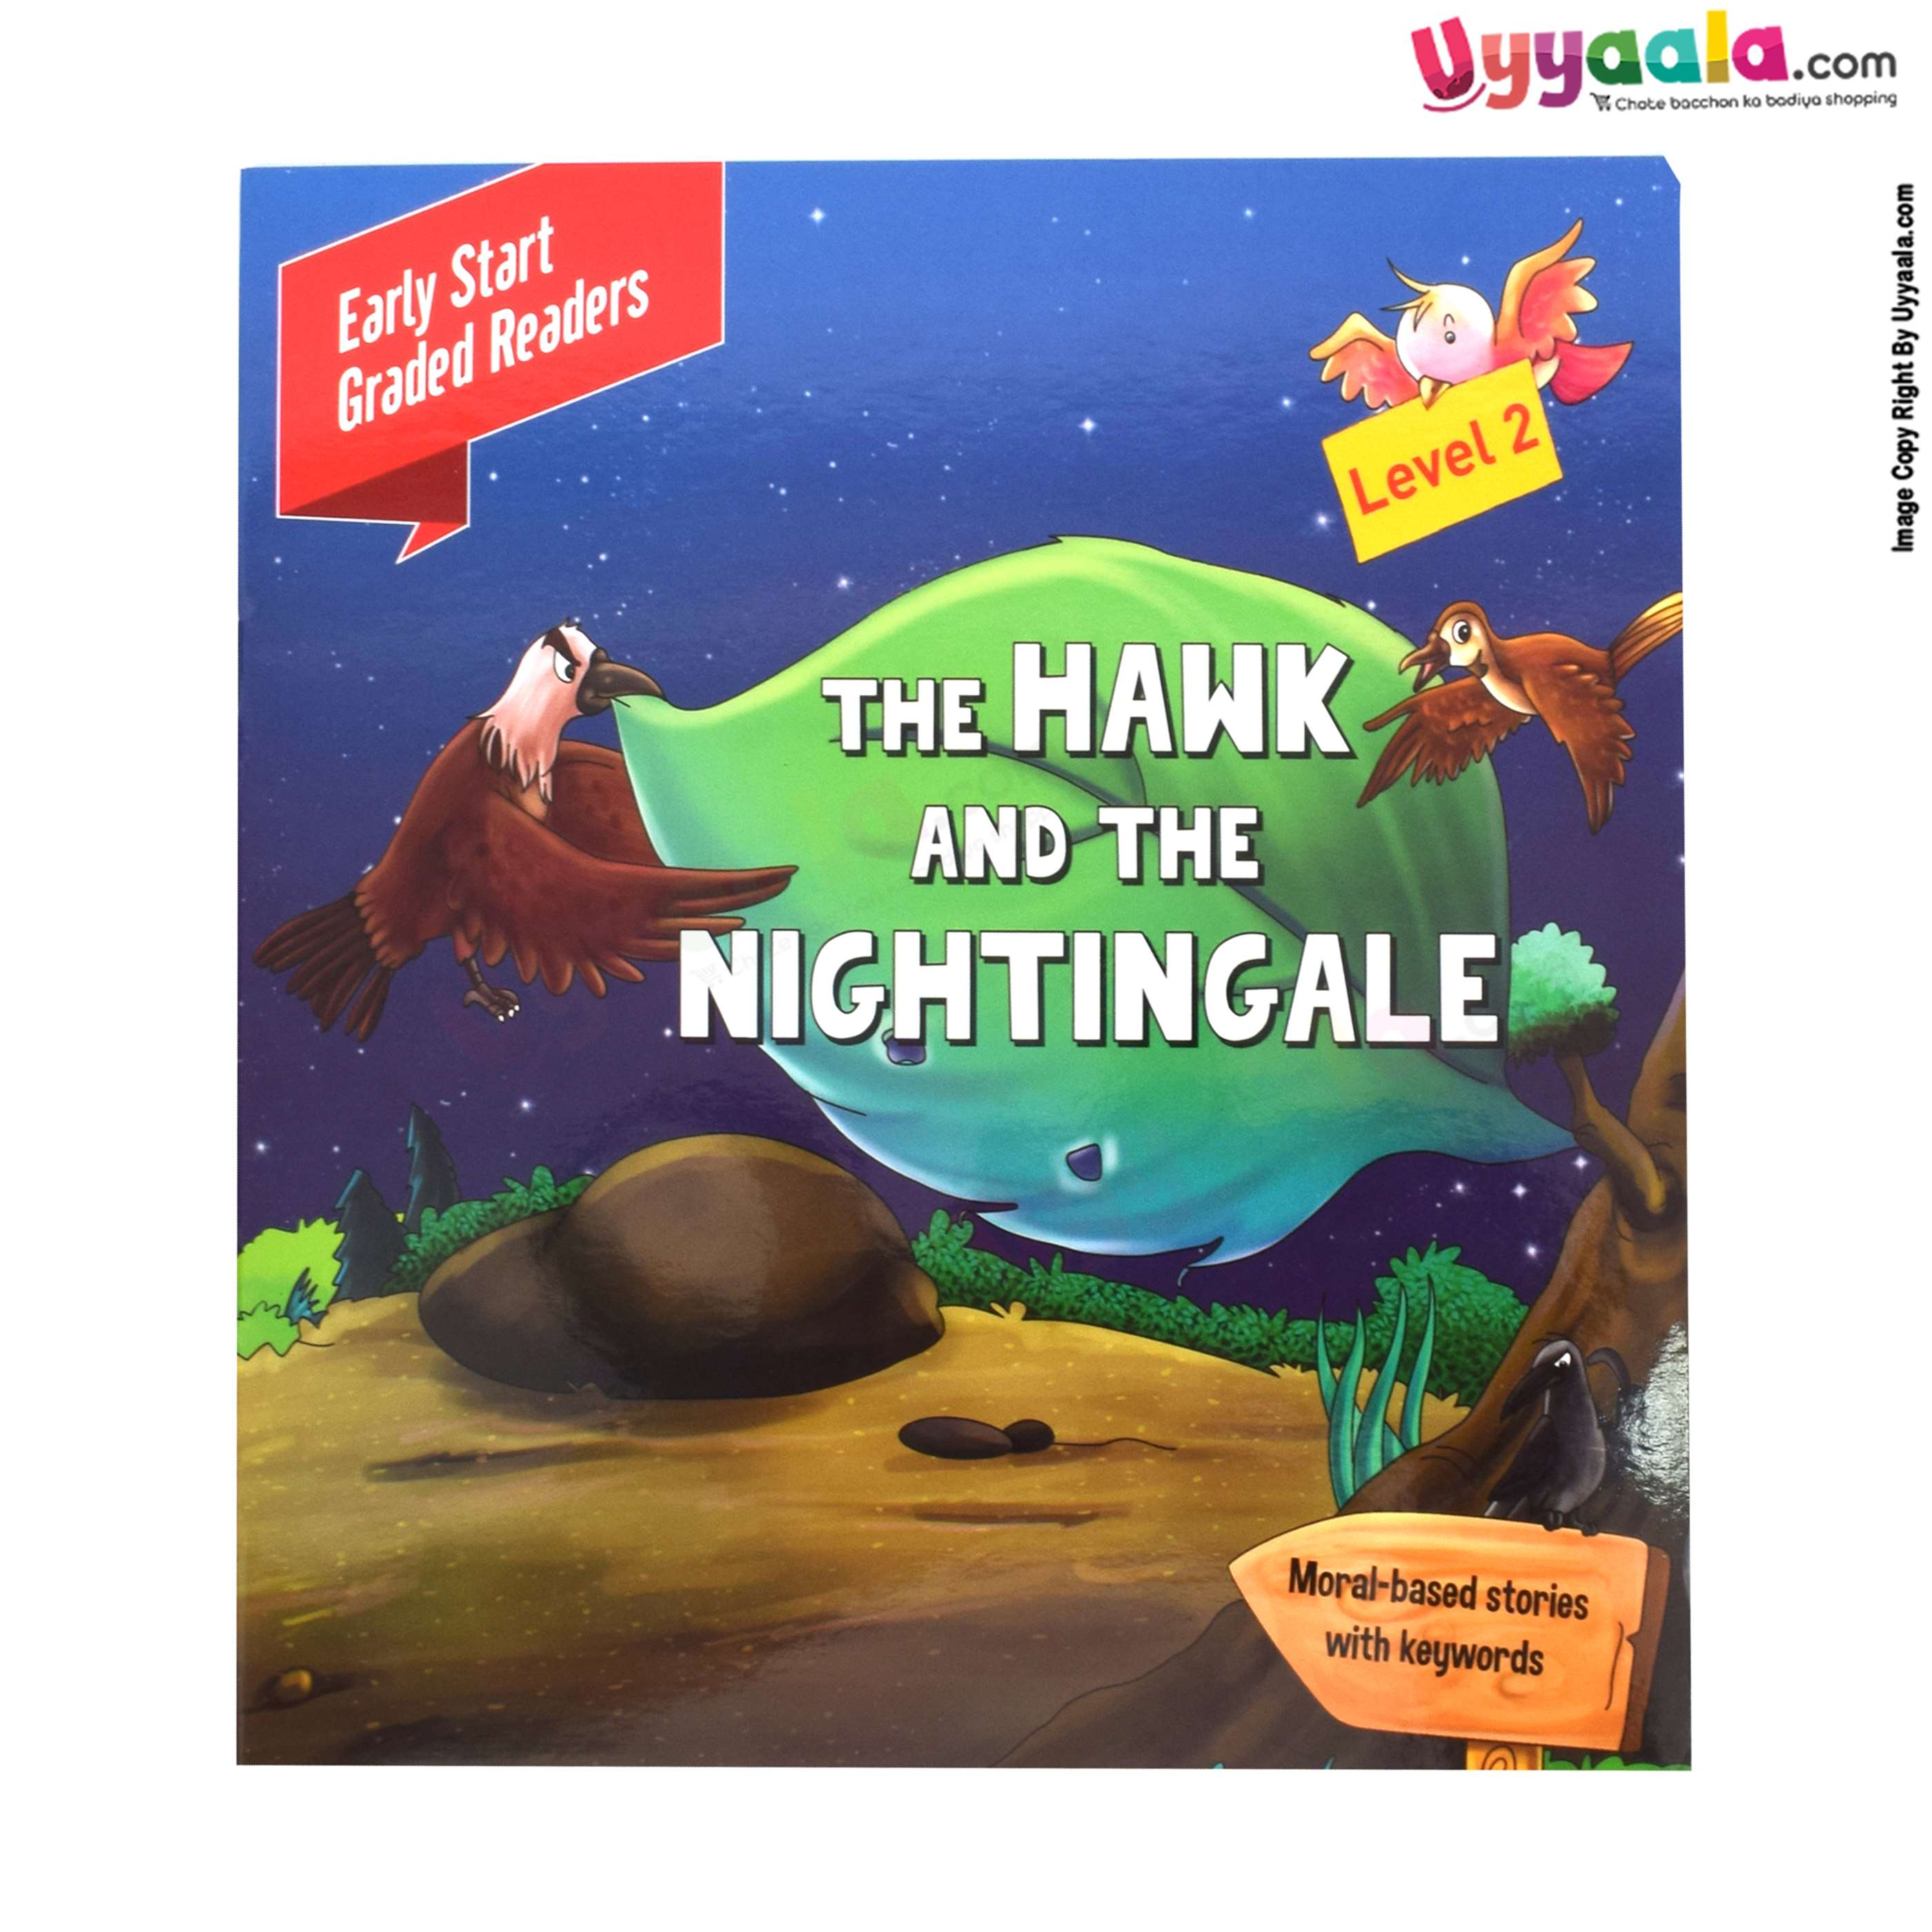 Early start graded readers - moral based stories, the hawk and the nightingale, level - 2 (2 - 5 years)